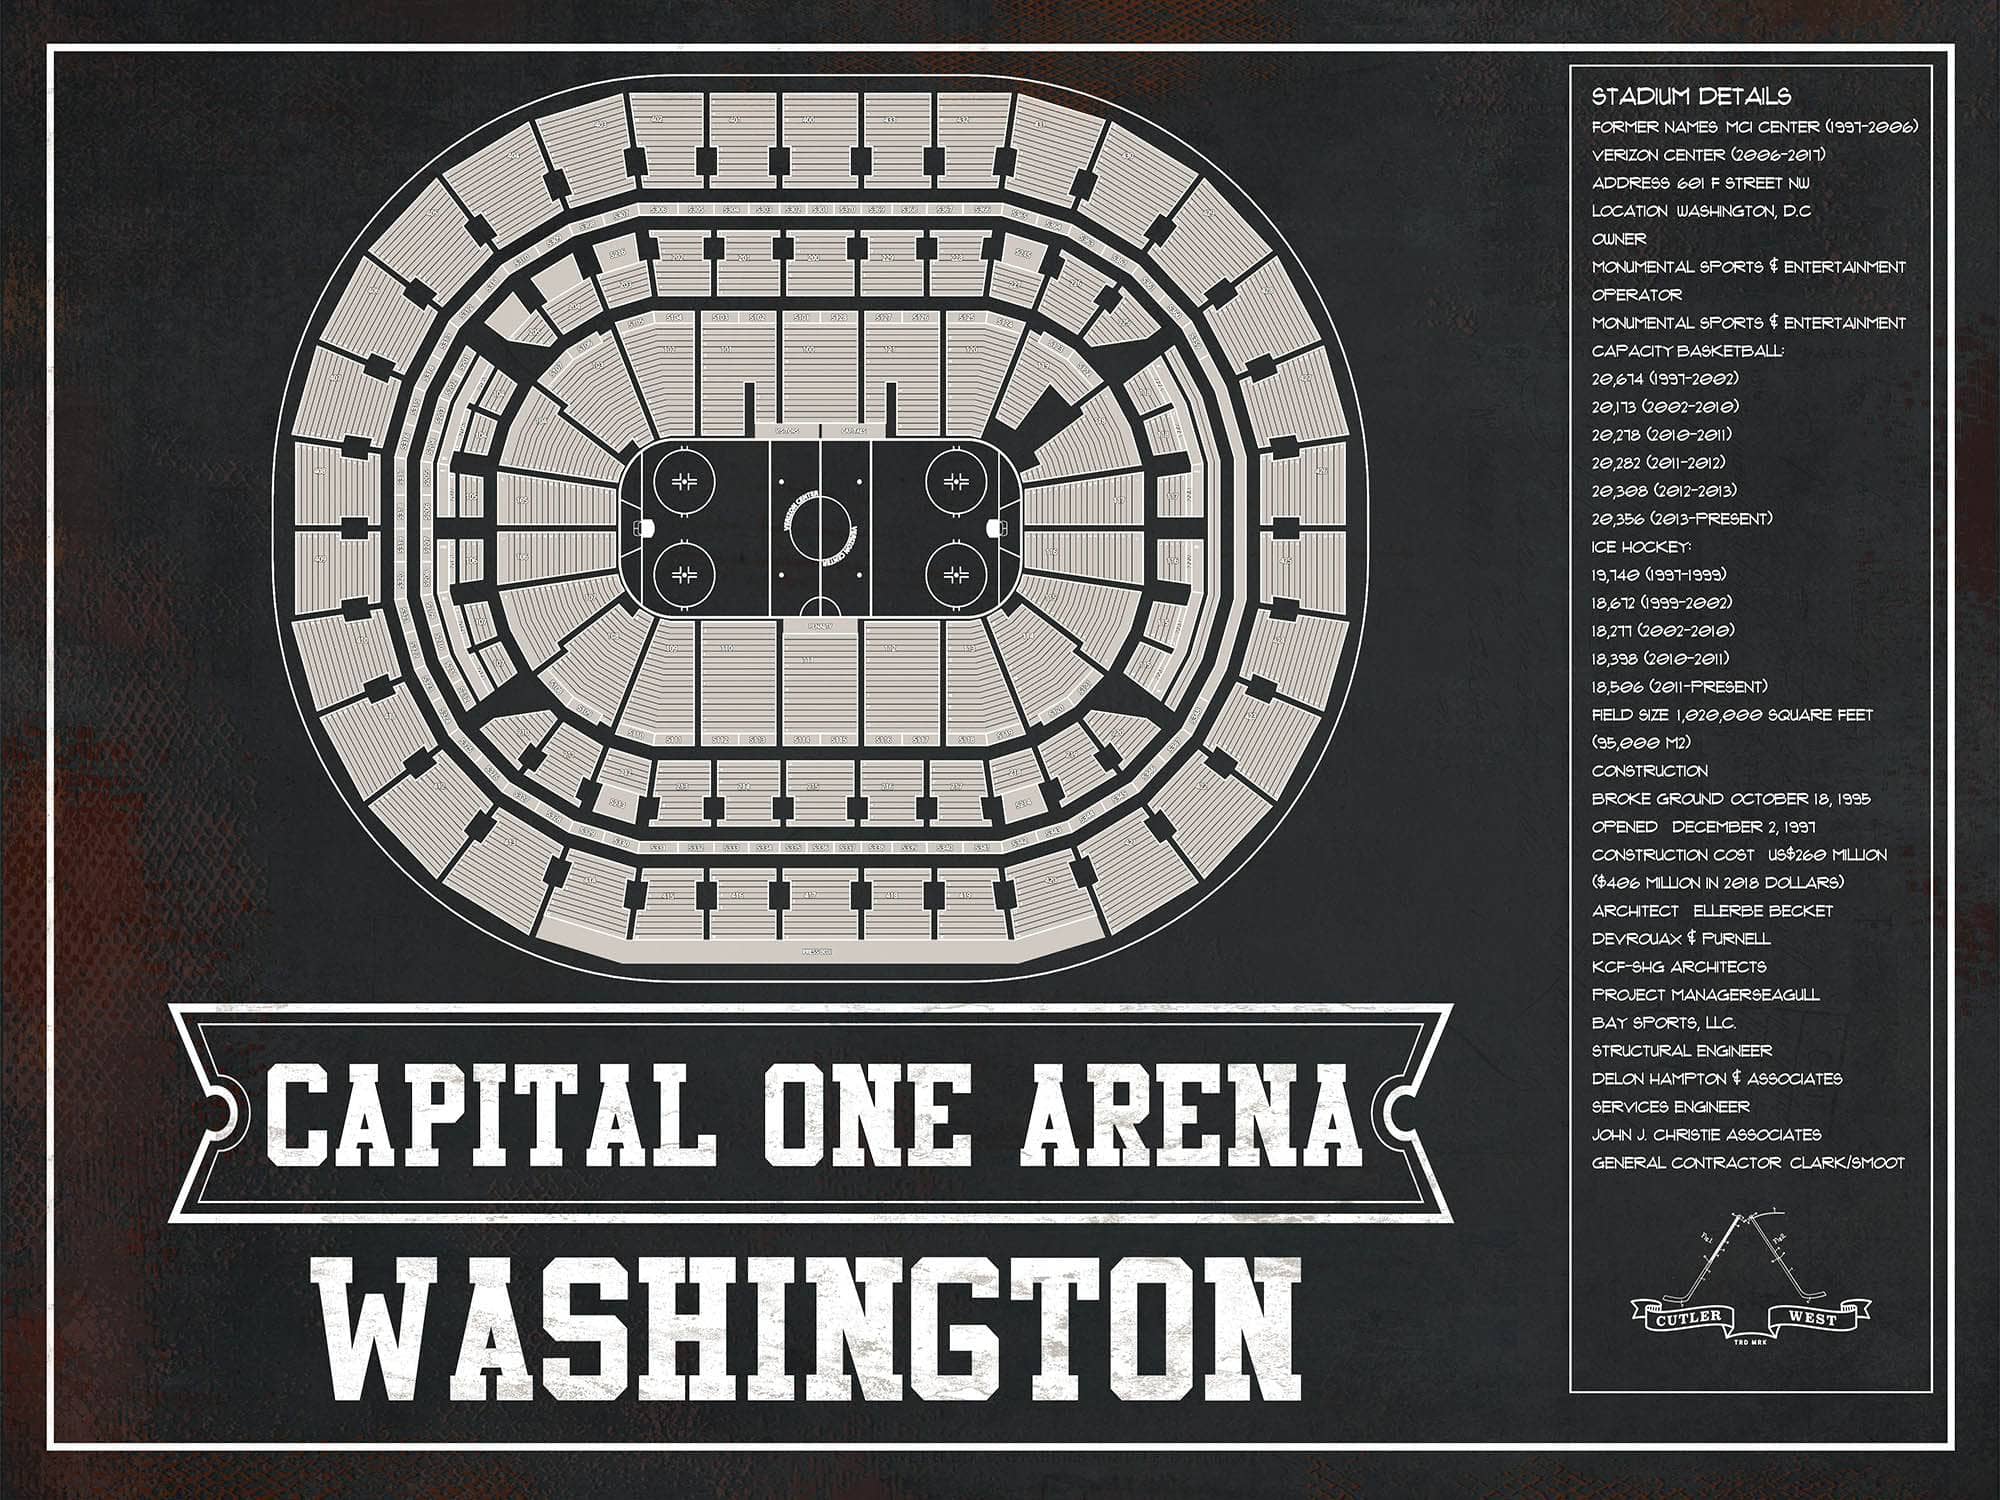 Cutler West 14" x 11" / Unframed Washington Capitals Team color - Capital One Arena Seating Chart Vintage Art Print 673825643-TEAM-14"-x-11"81776